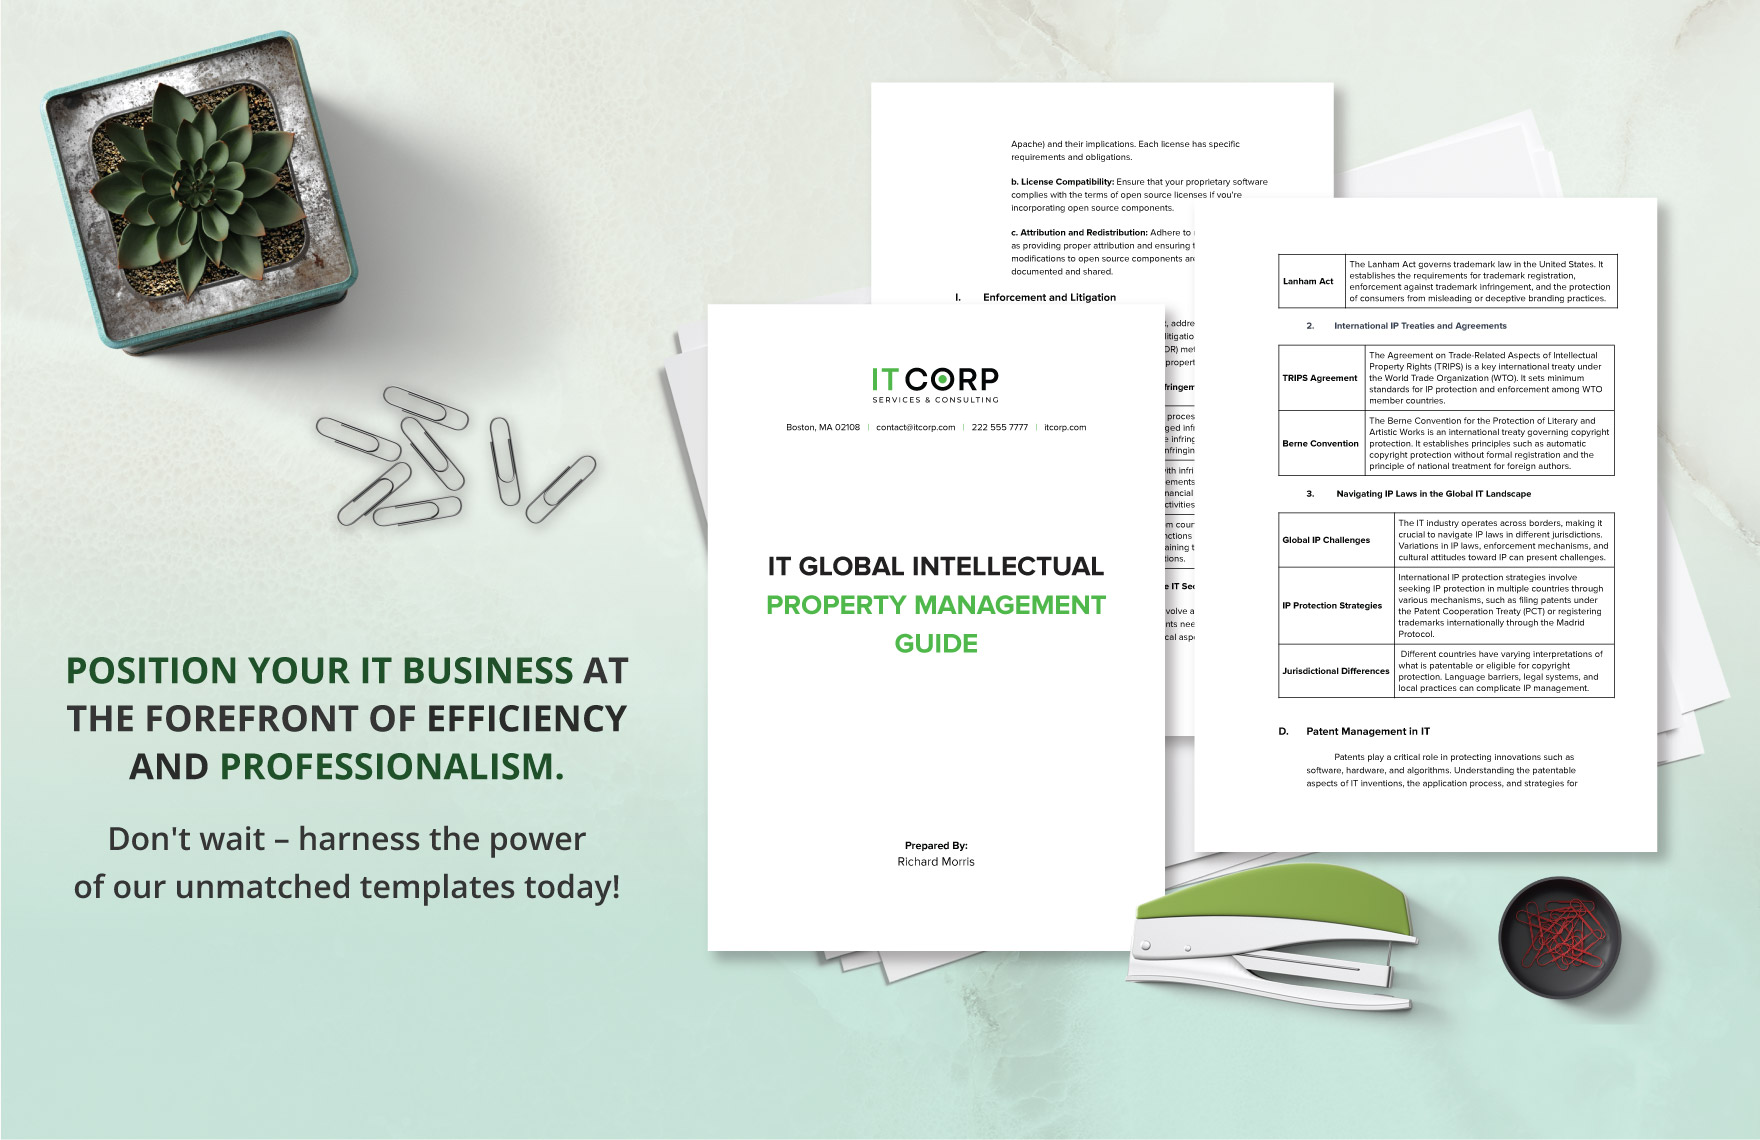 IT Global Intellectual Property Management Guide Template